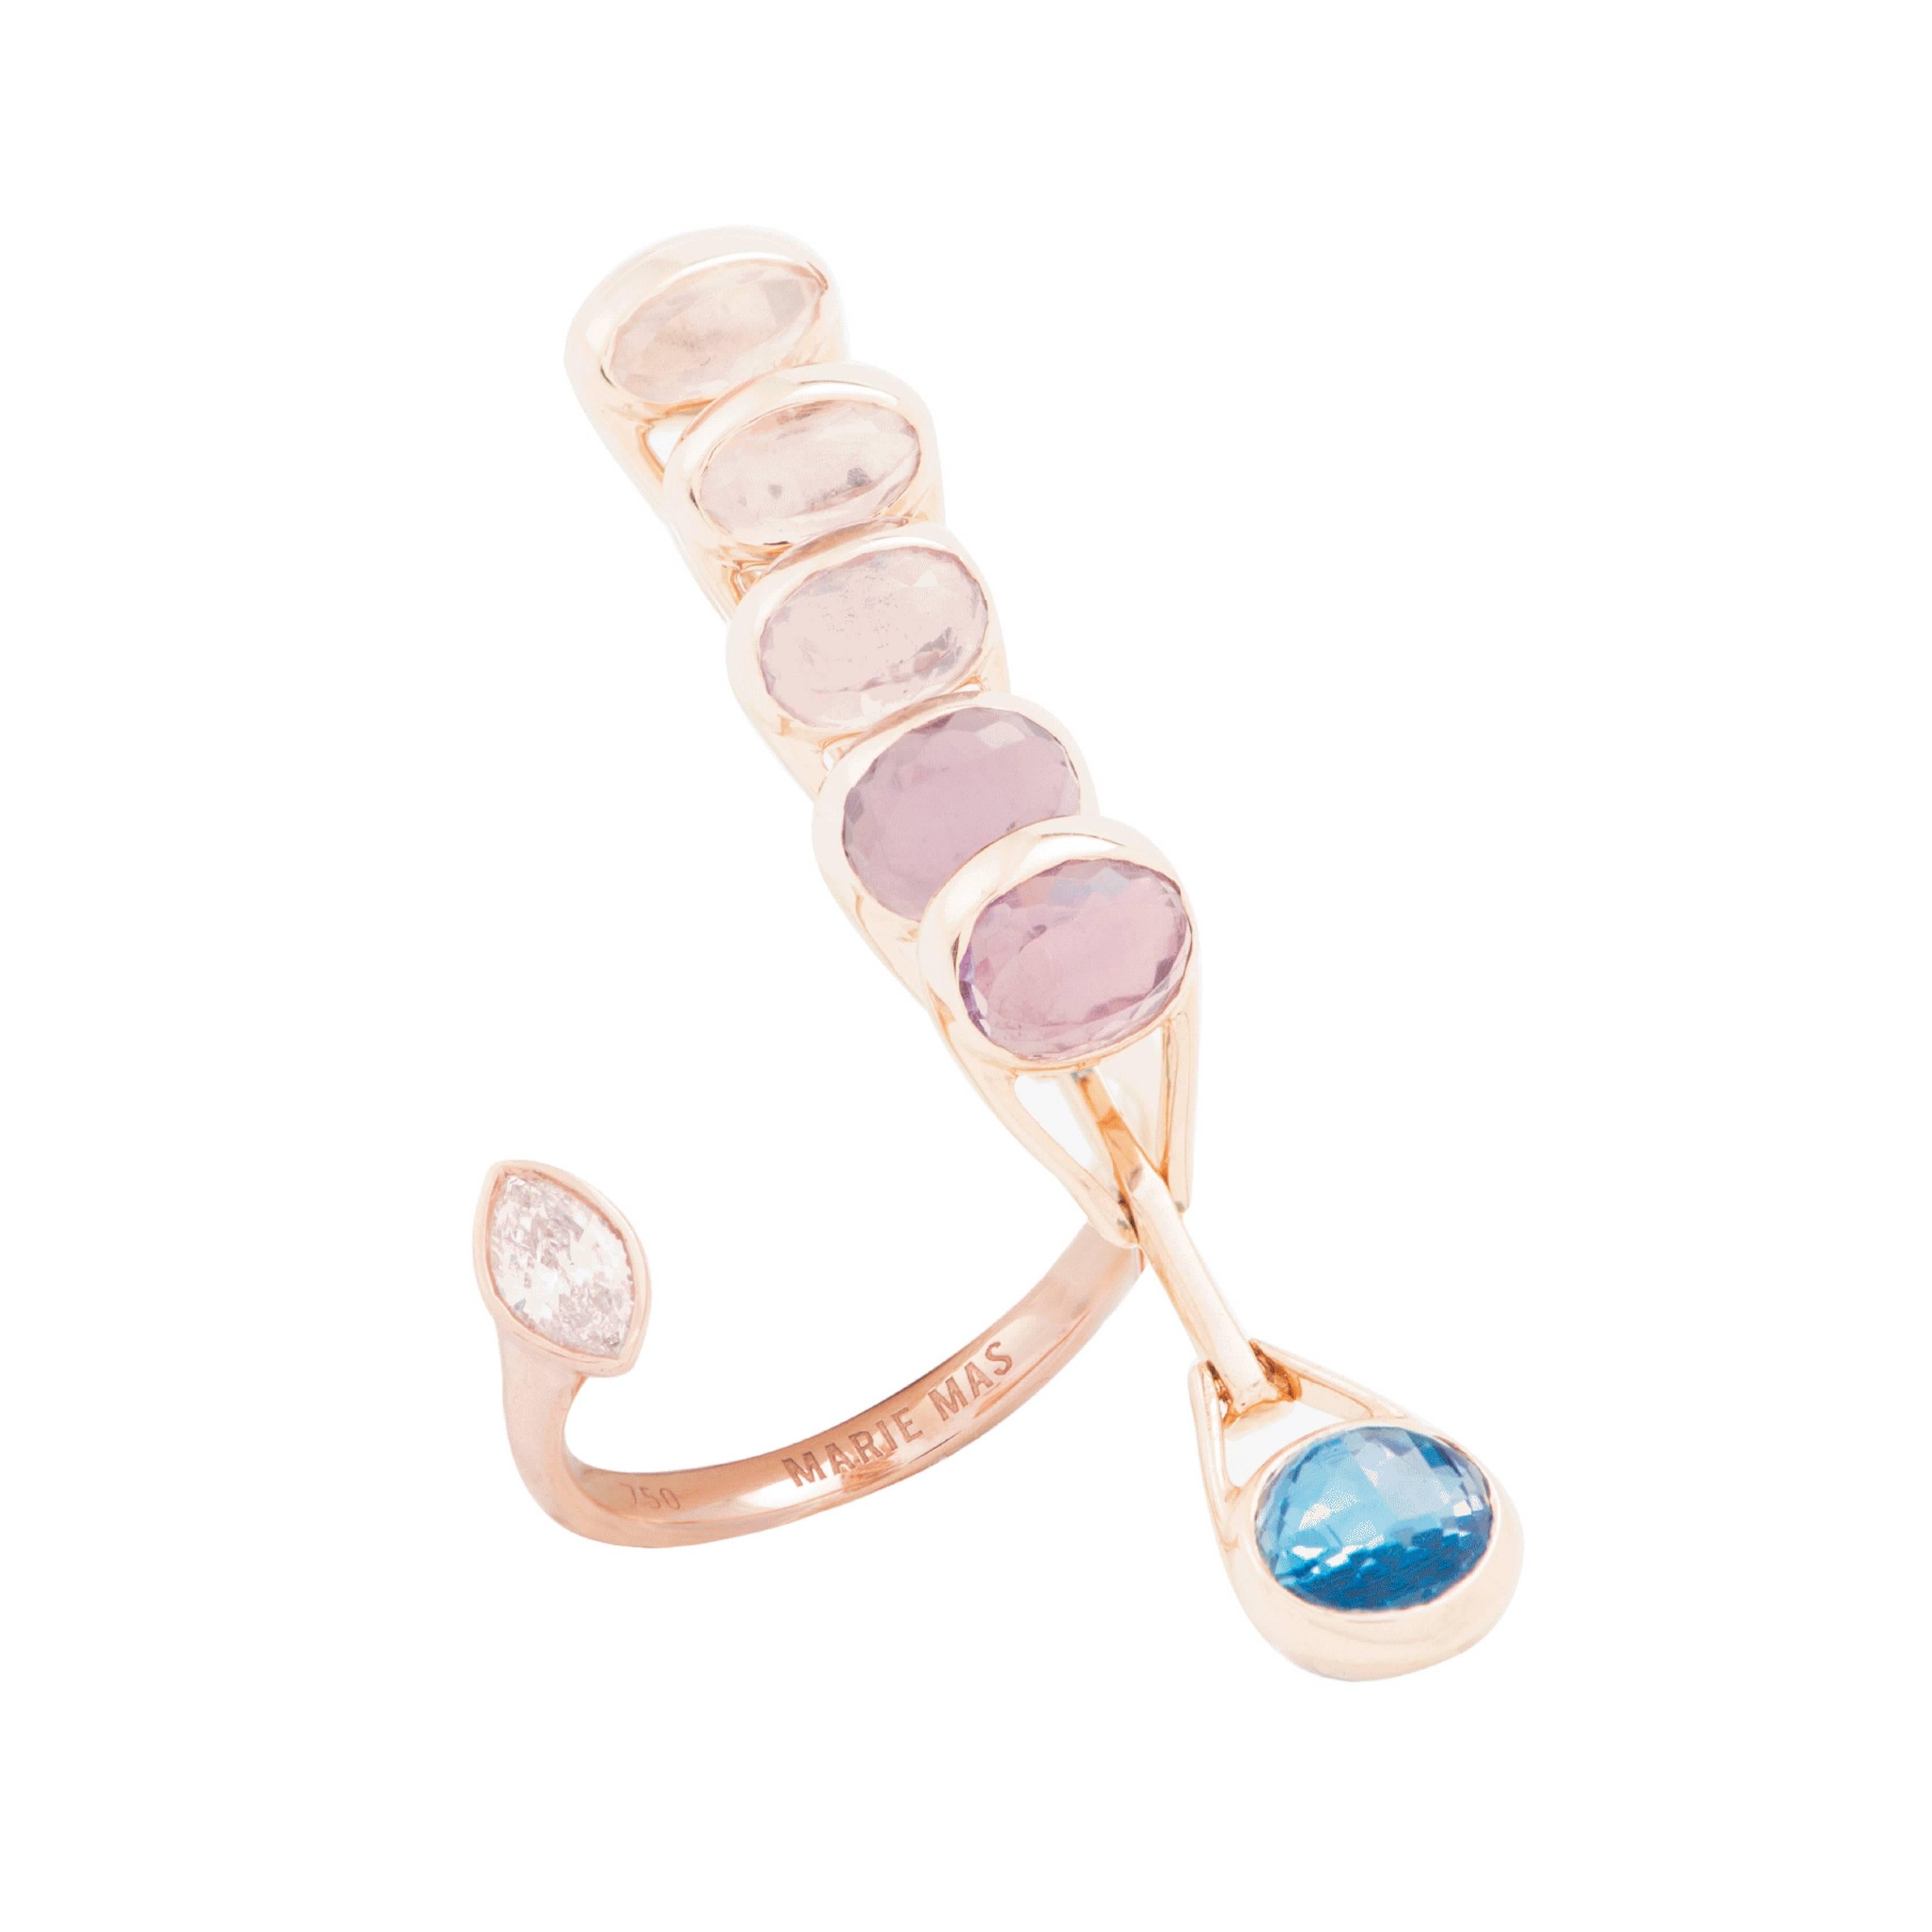 This Reversible Dancing Open Ring from the French Jewelry brand Marie Mas is made in 18 Karat Rose Gold. When you move you hand, the ring is moving with you and changing color. All the stones are articulated and can move like dominos, from one side